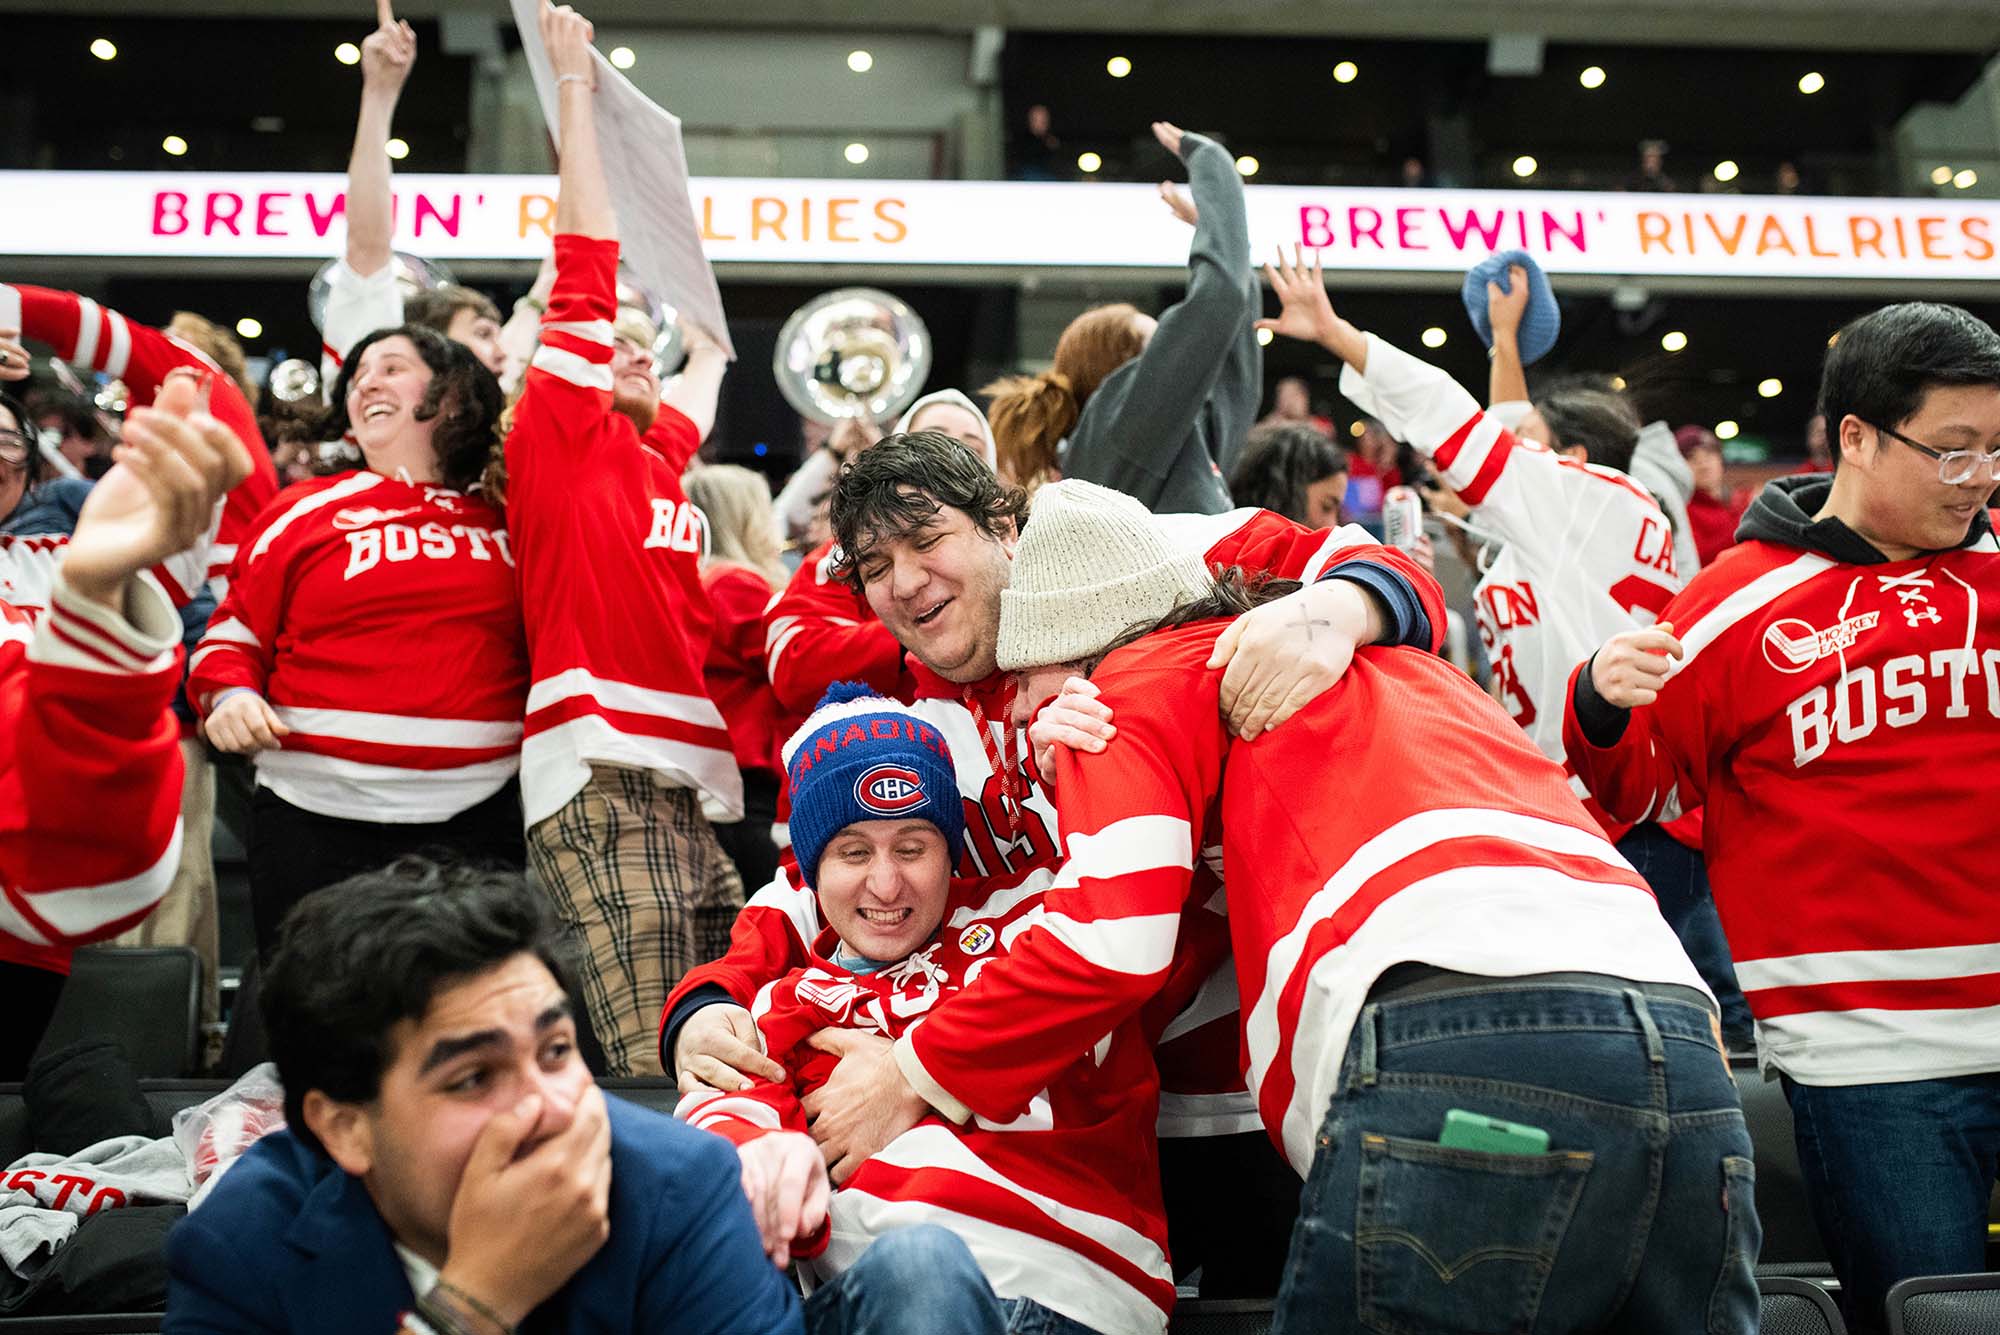 Photo: Fans dogpile in celebration after BU scores to bring the game into overtime during the 45th Women’s Beanpot Championship Round at TD Garden.